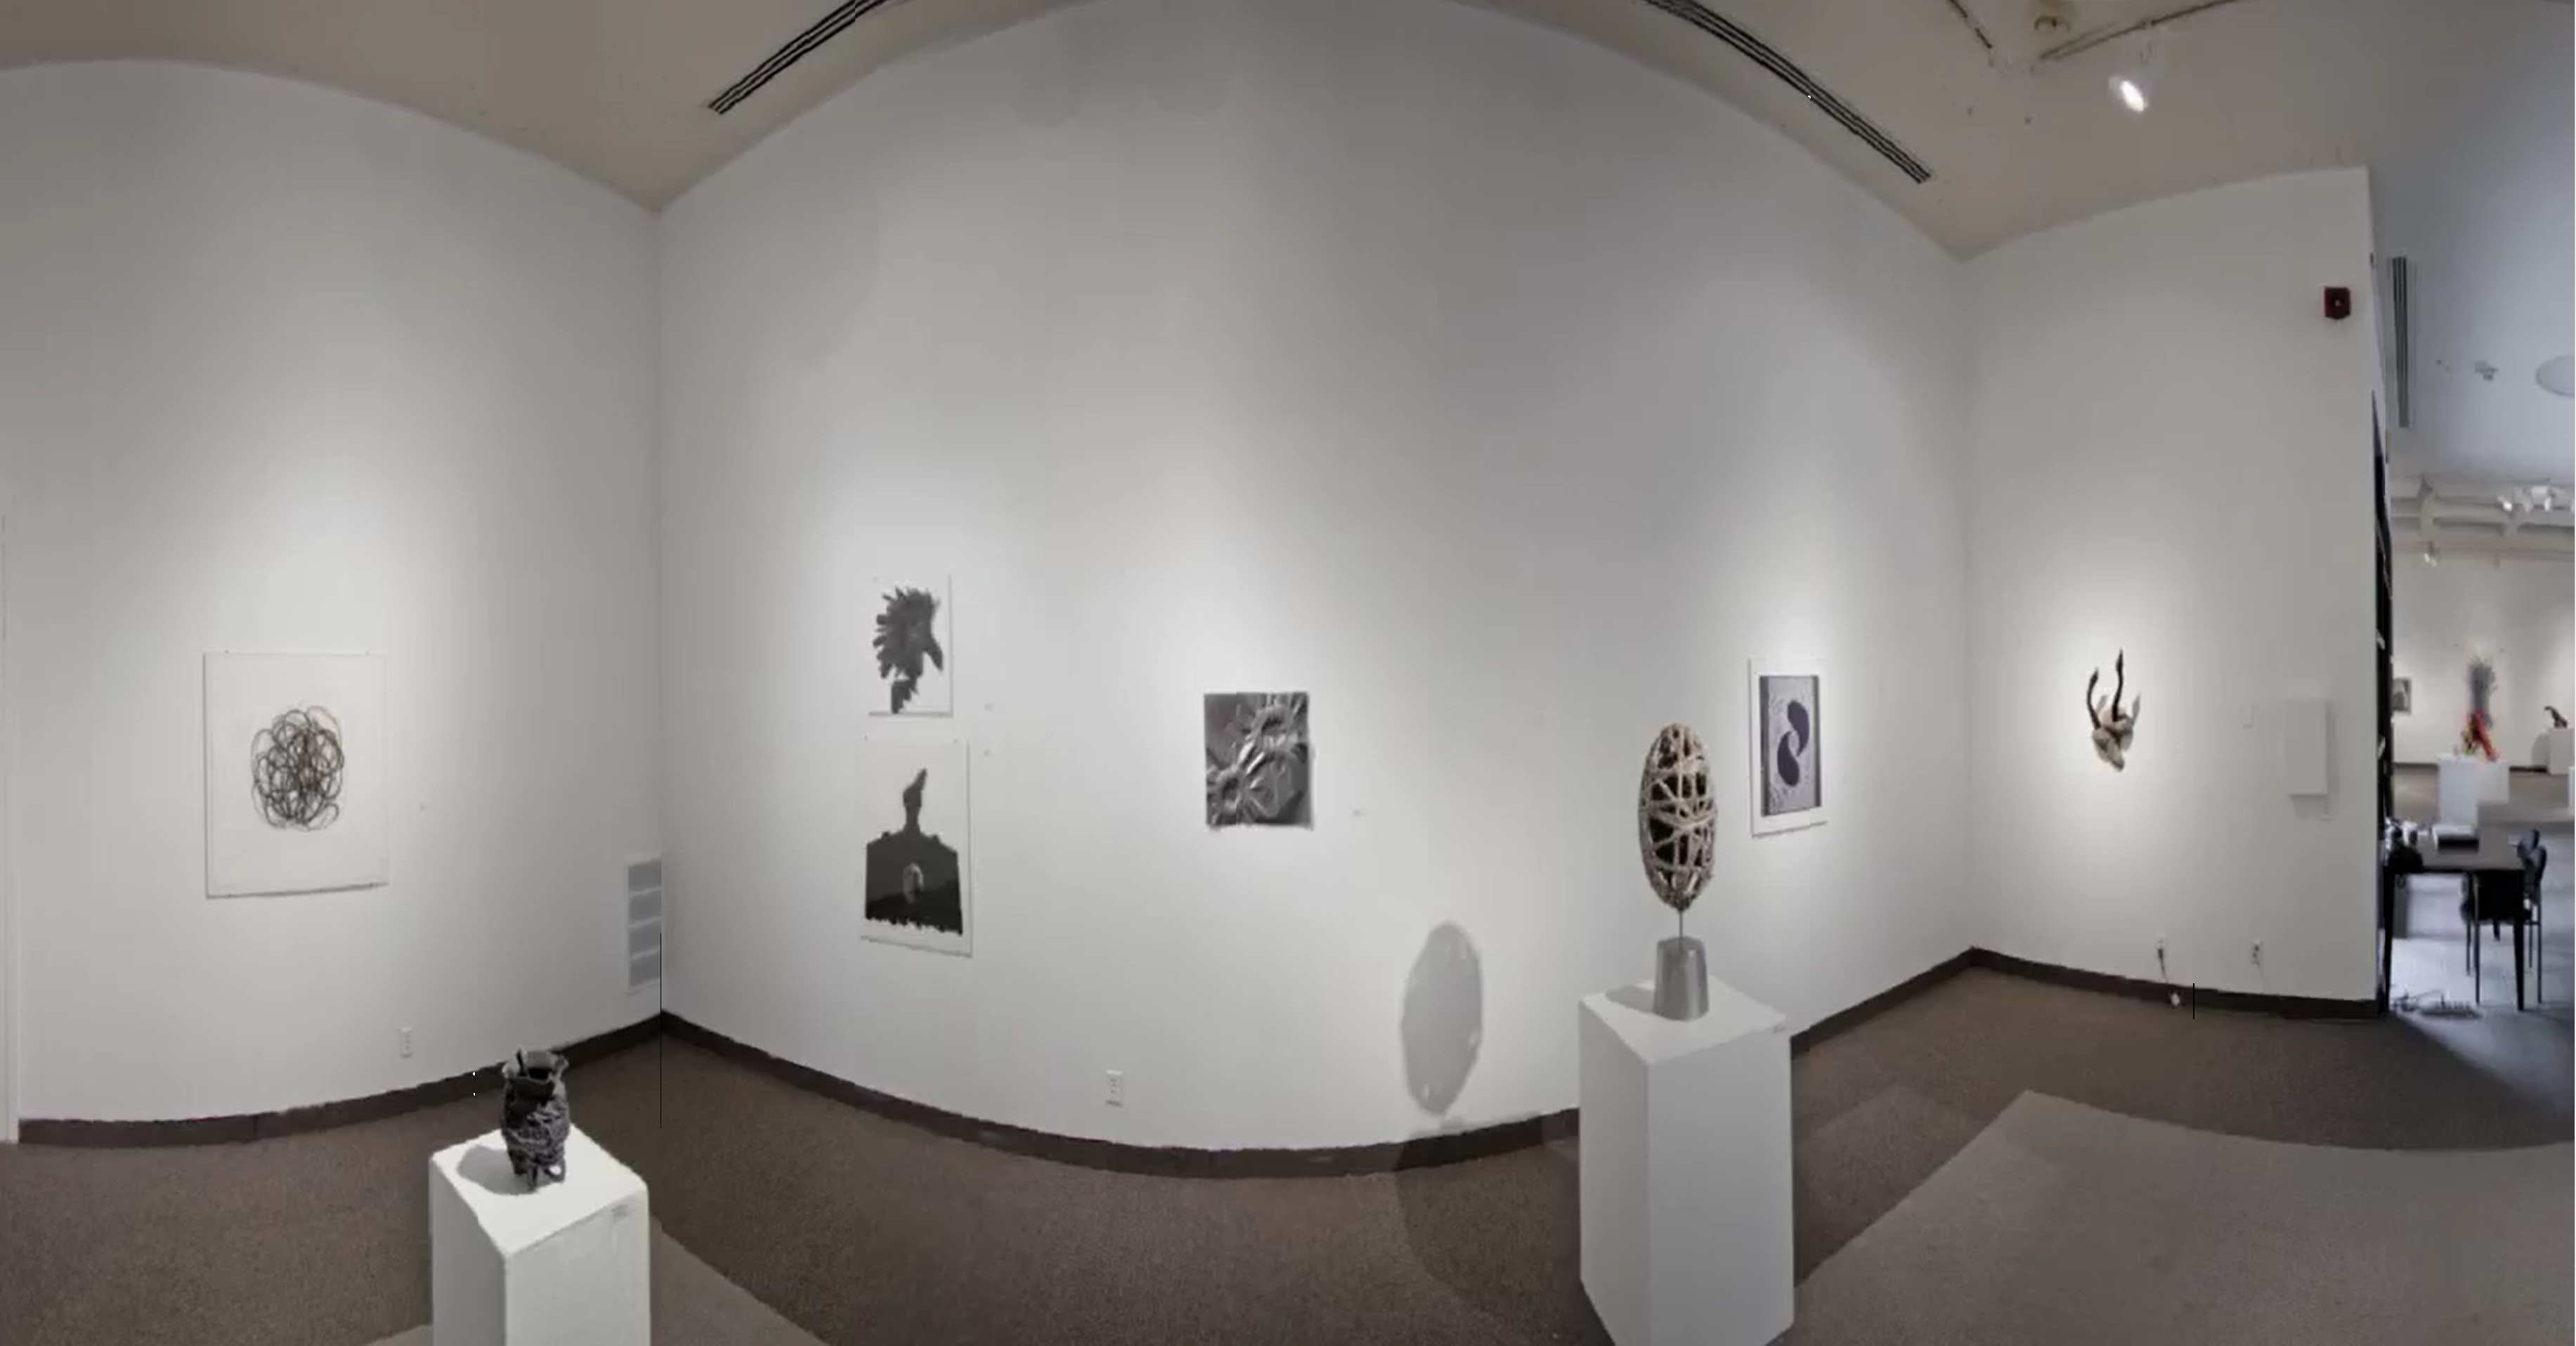 Installation View, Front East Gallery, Ink & Clay 37  Exhibition, Mar. 17, 2011 to Apr. 19, 2011.